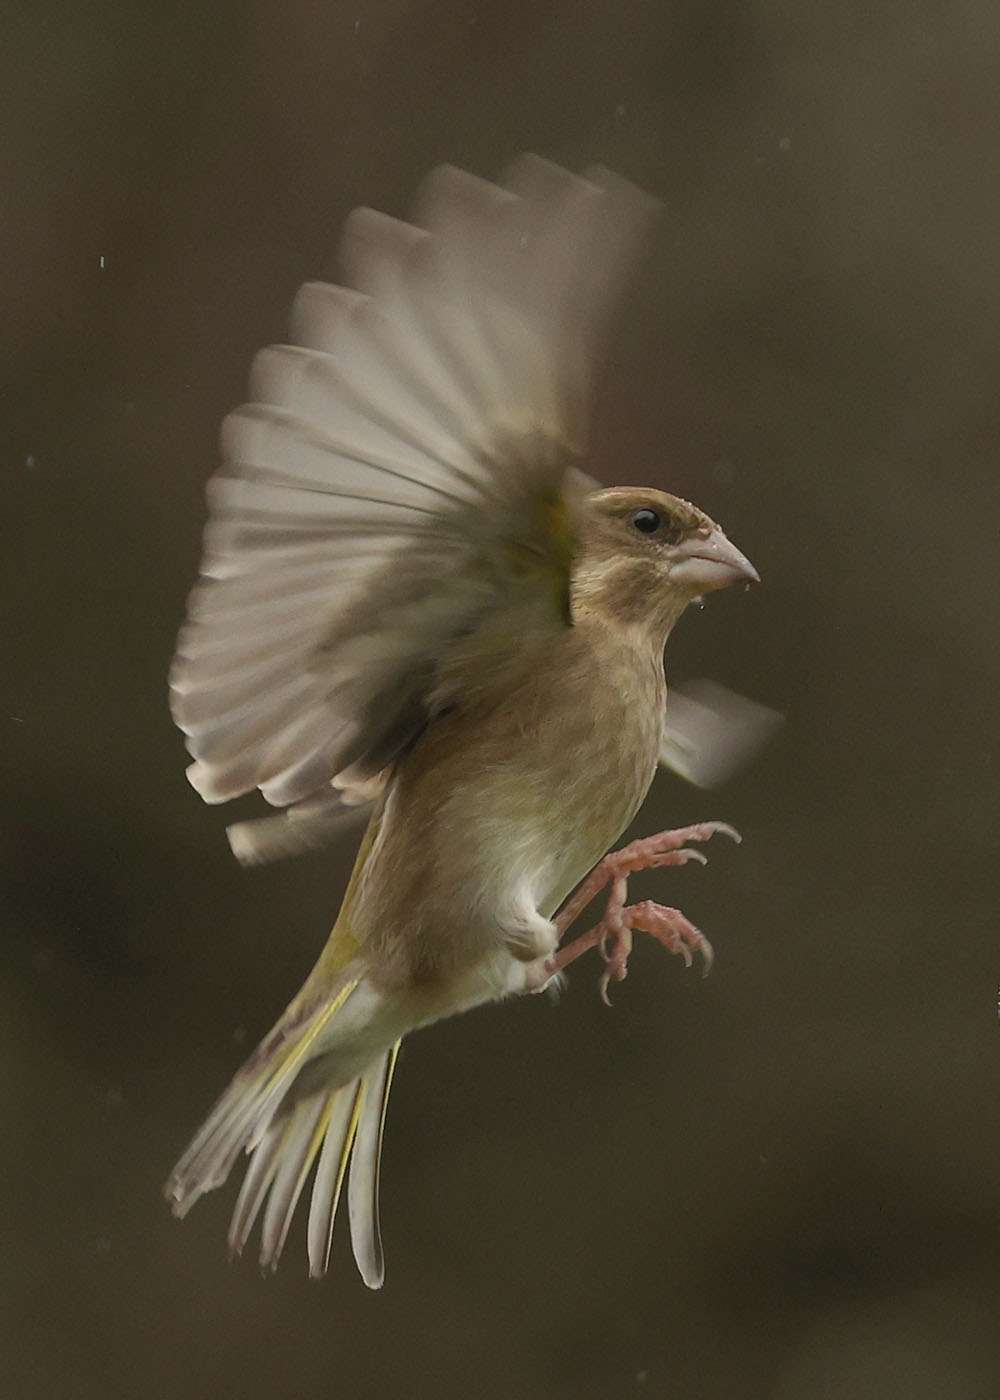 Greenfinch by Steve Hopper at South Brent